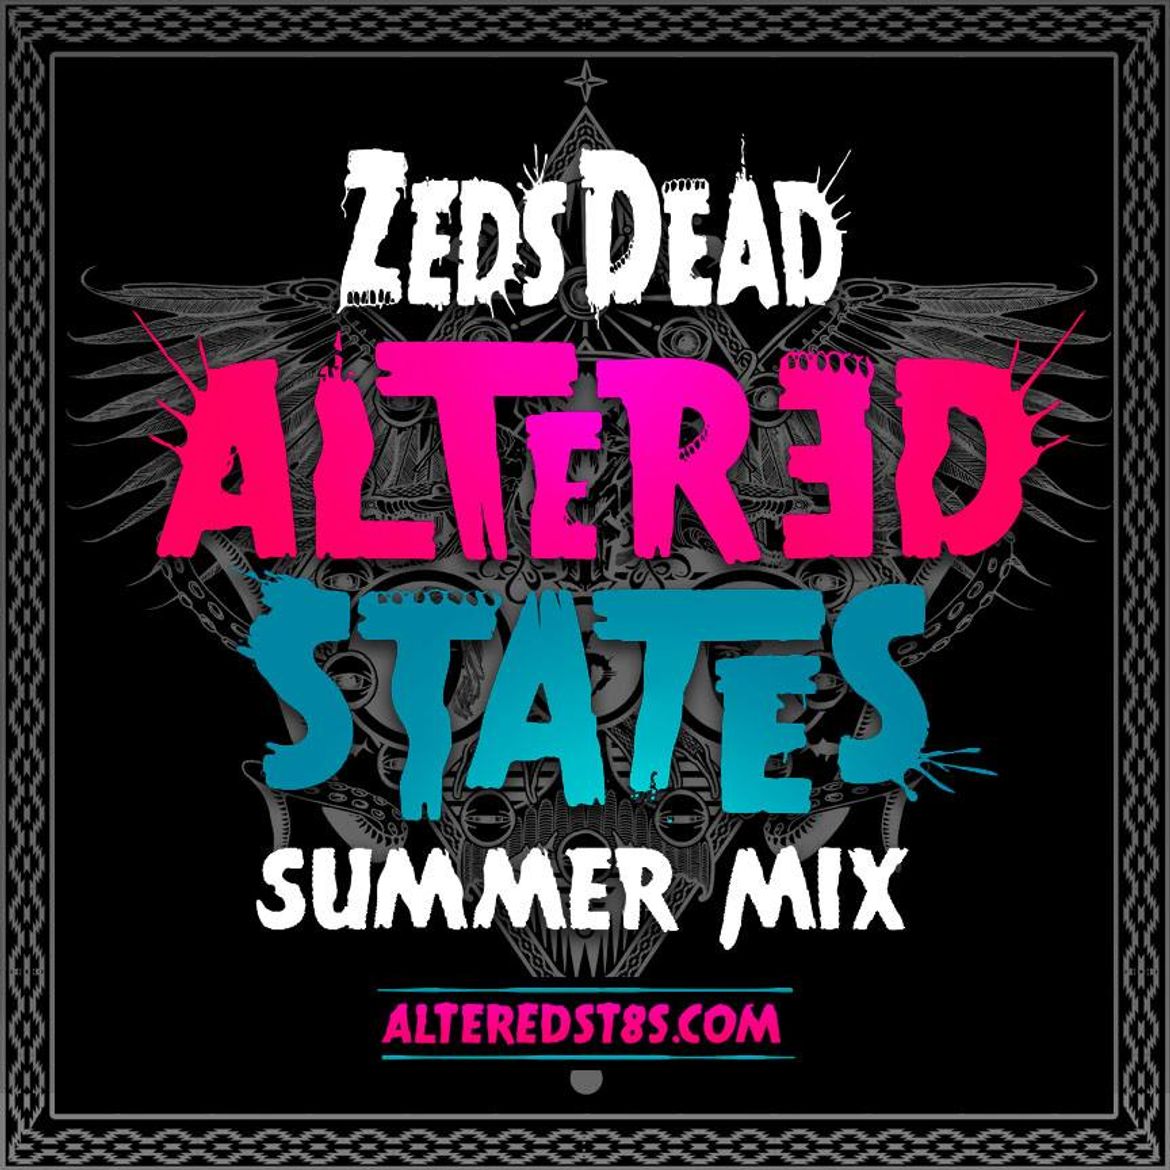 Mixed state. Dead Zed. Честер саммер микс. Обложка альбома Zeds Dead. Zeds Dead - one three Nine.